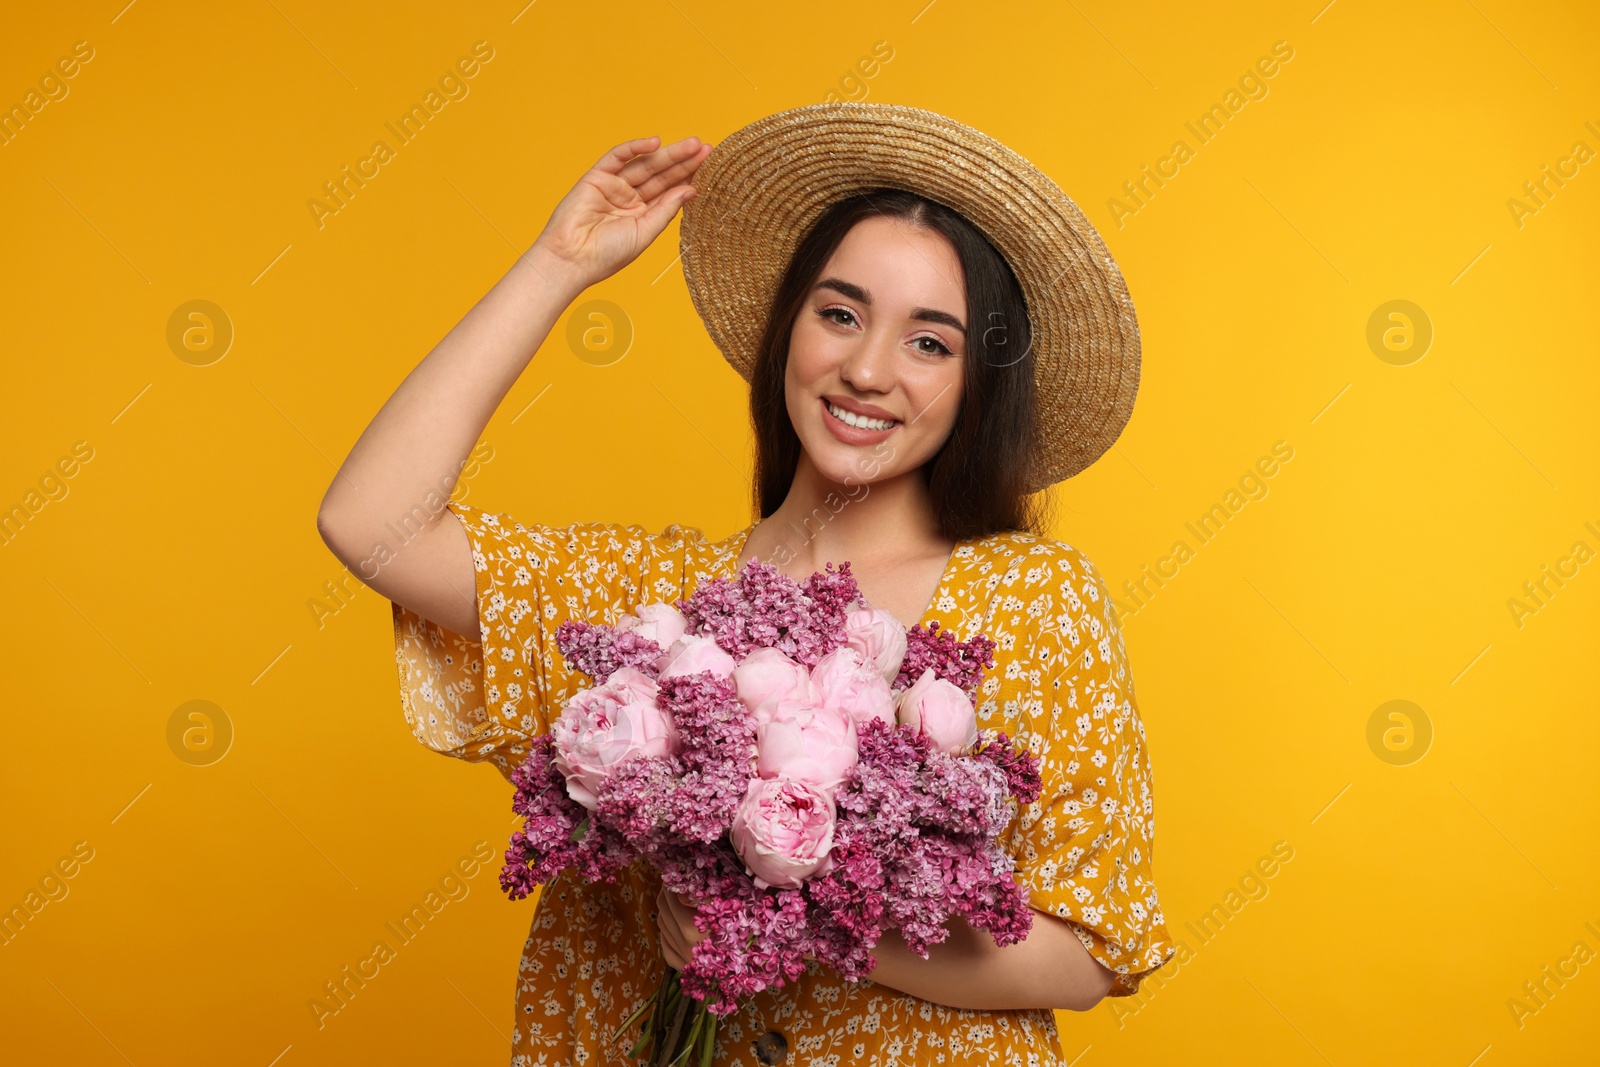 Photo of Beautiful woman with bouquet of spring flowers on yellow background